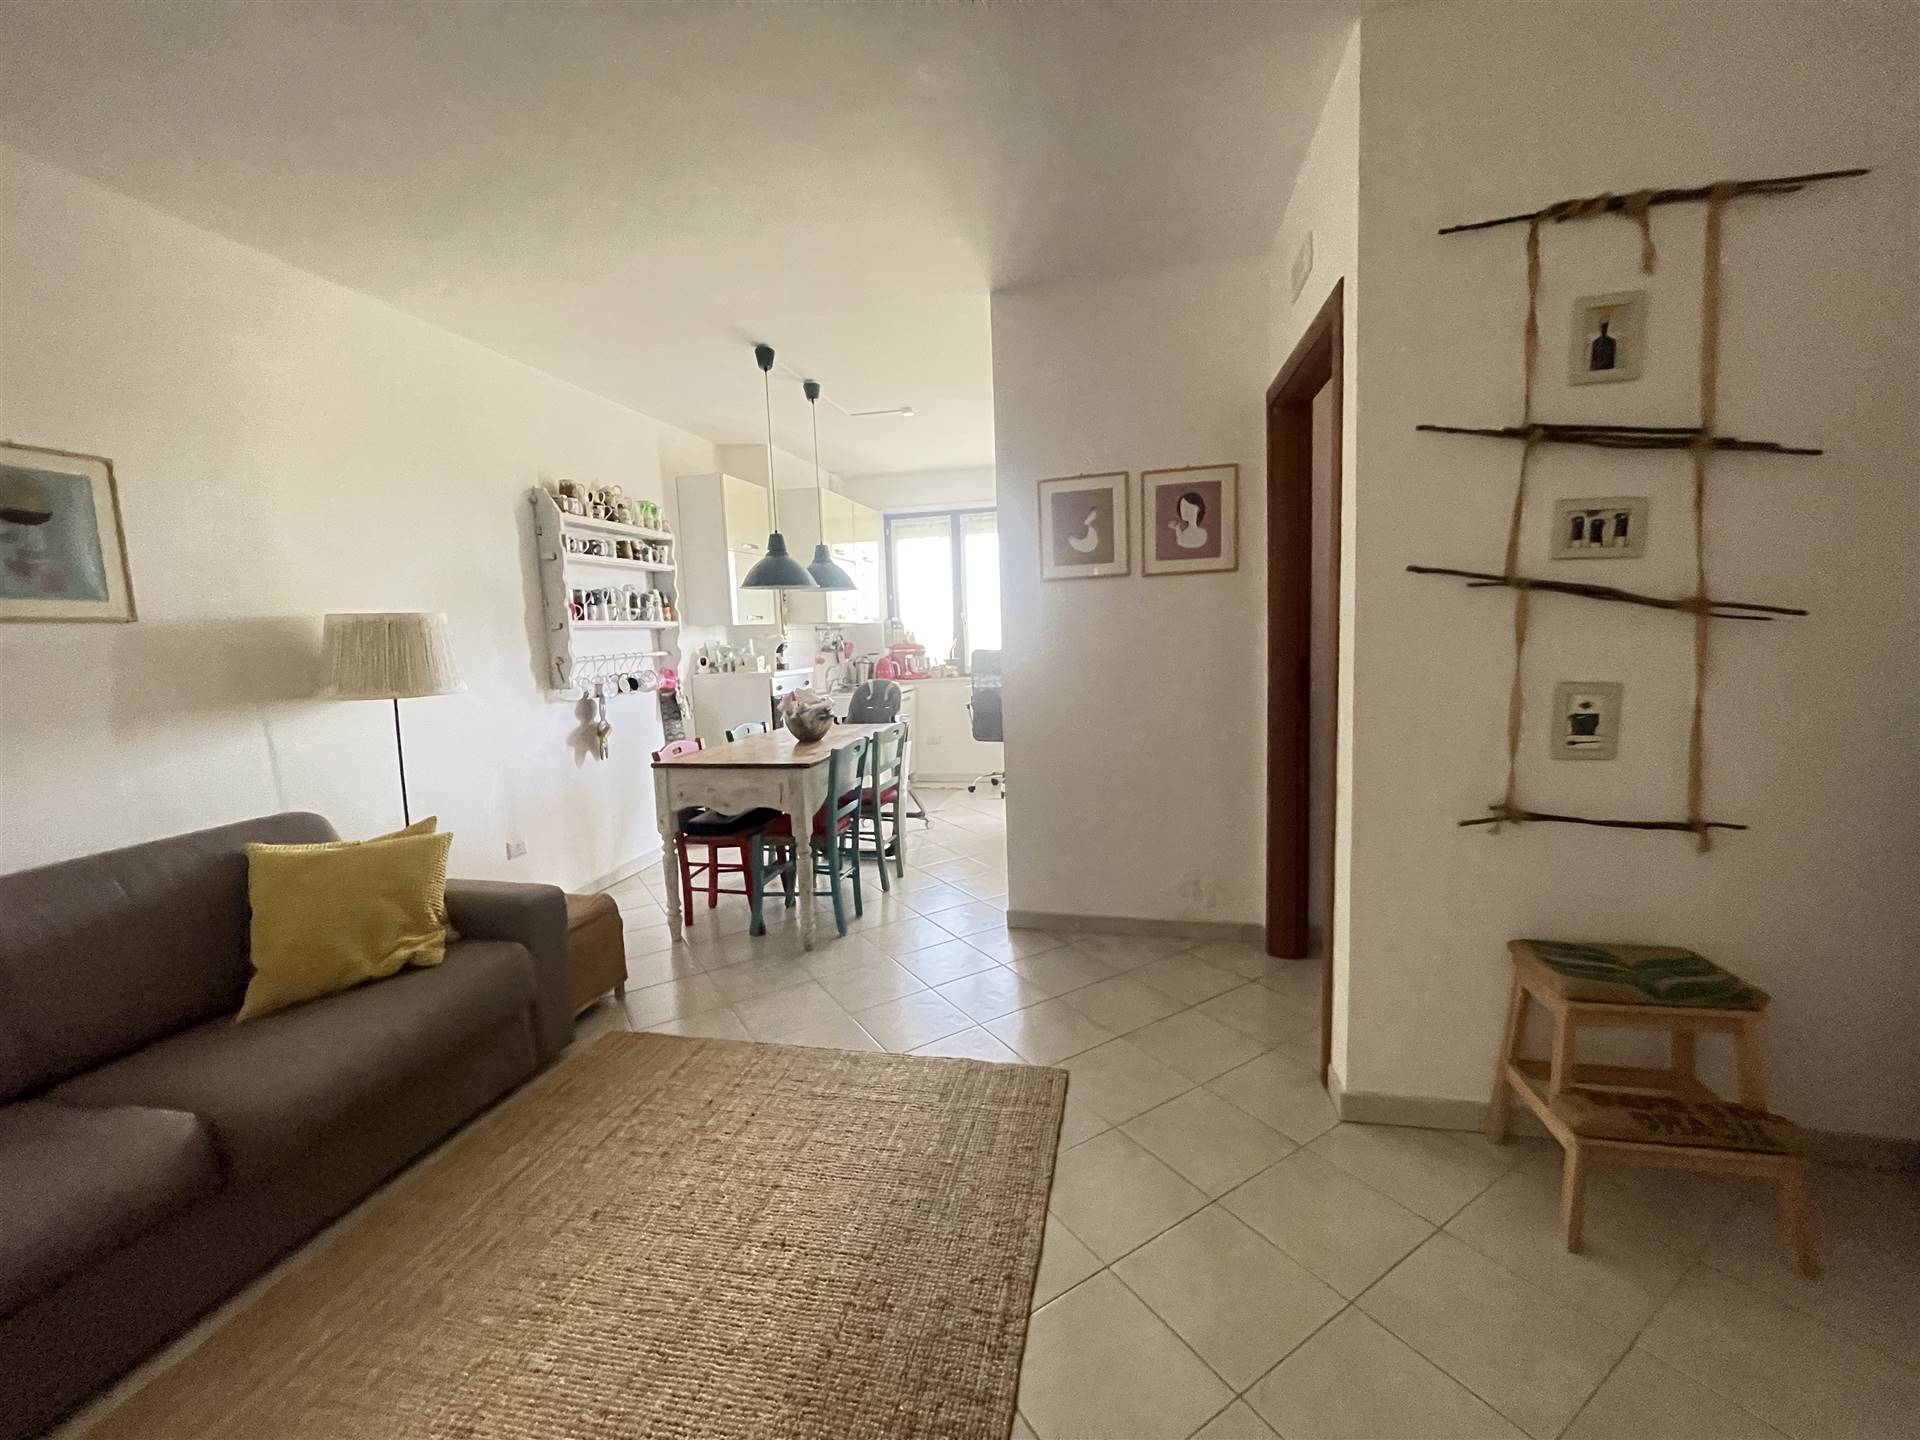 STADIO A, LECCE, Apartment for sale of 55 Sq. mt., Excellent Condition, Heating Individual heating system, Energetic class: F, Epi: 138,42 kwh/m2 